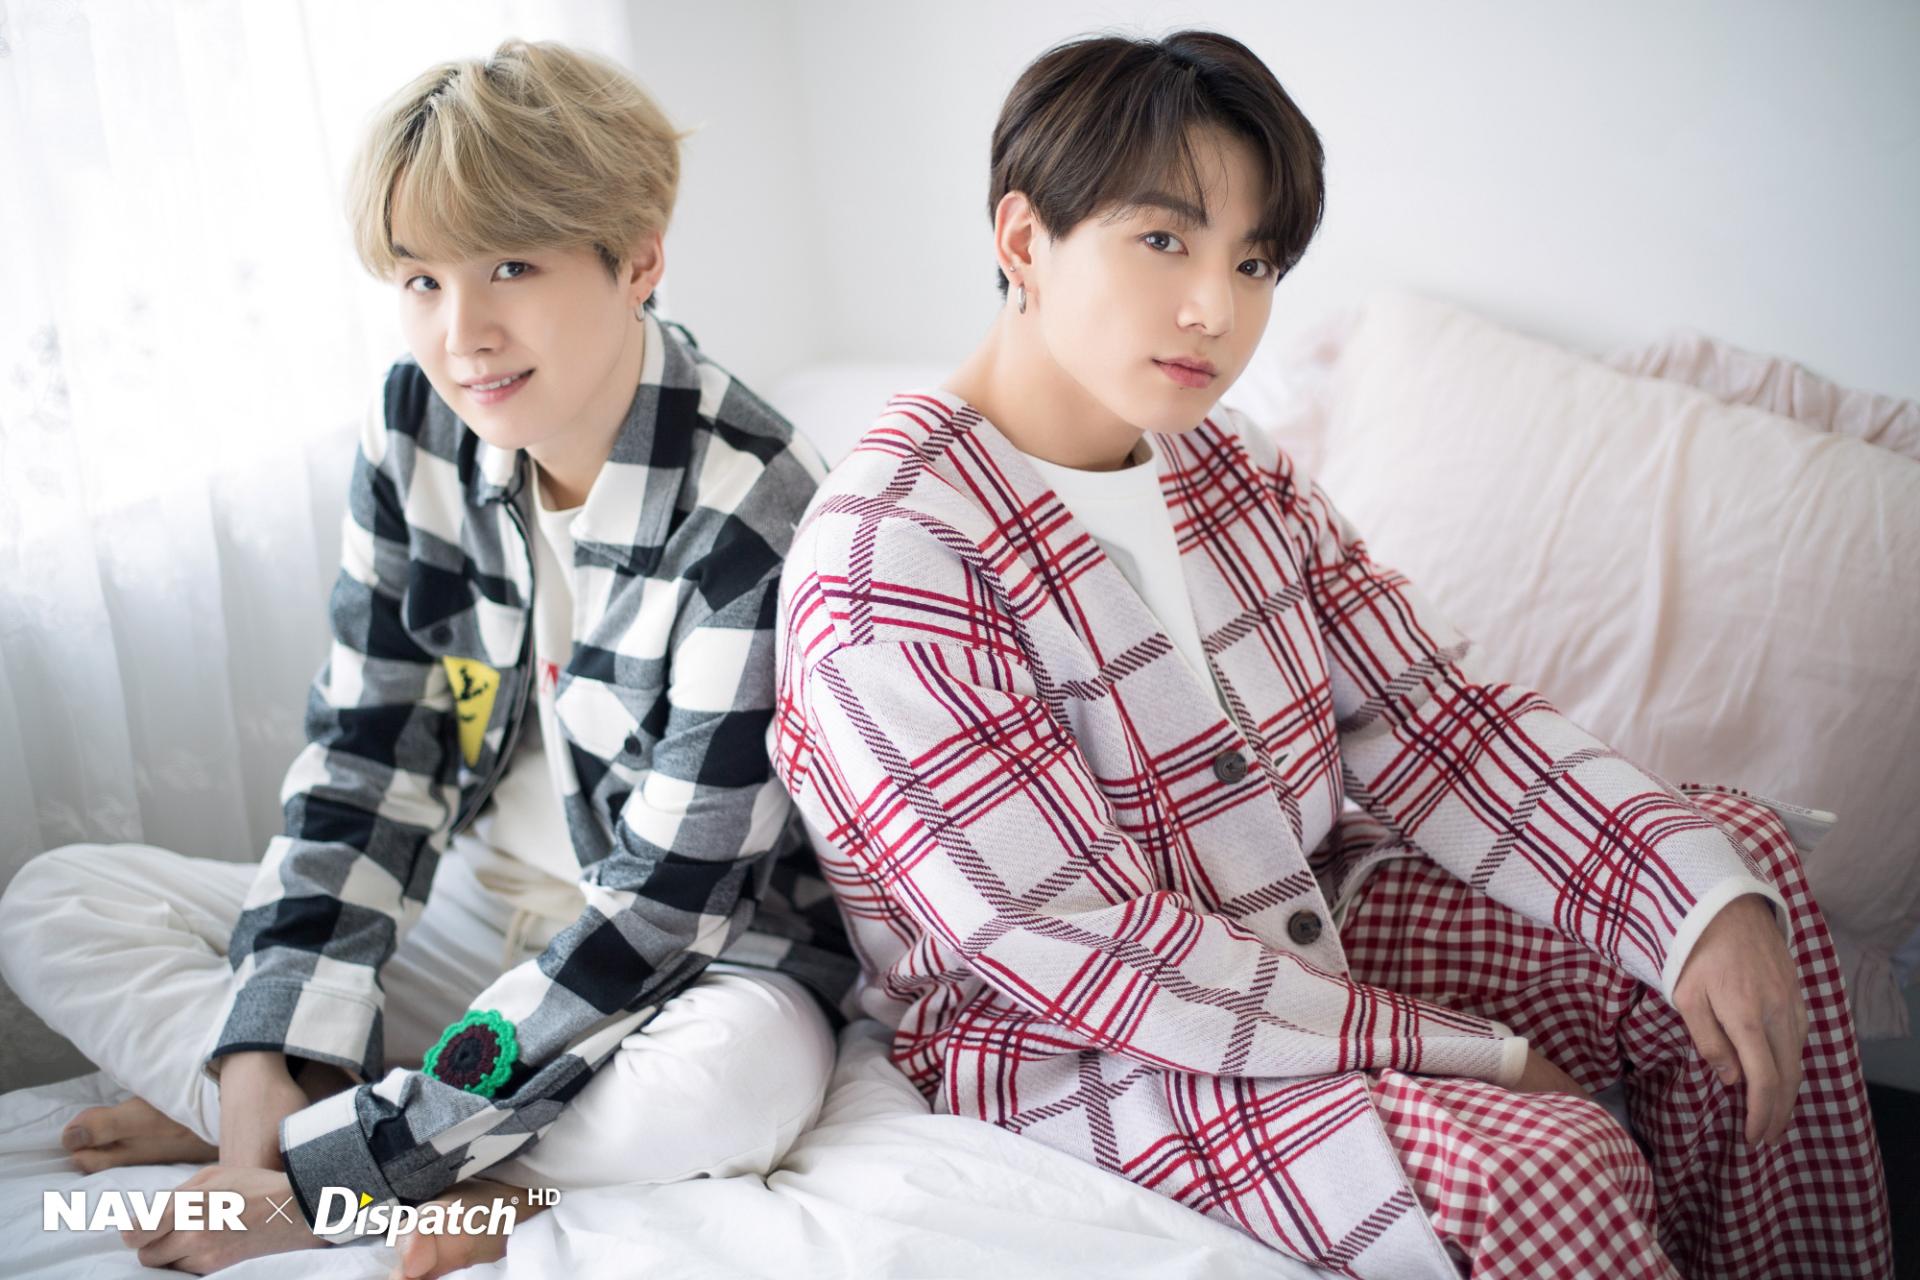 Suga Images Suga And Jungkook Hd Wallpaper And Background - Bts Naver X Dispatch 2019 , HD Wallpaper & Backgrounds